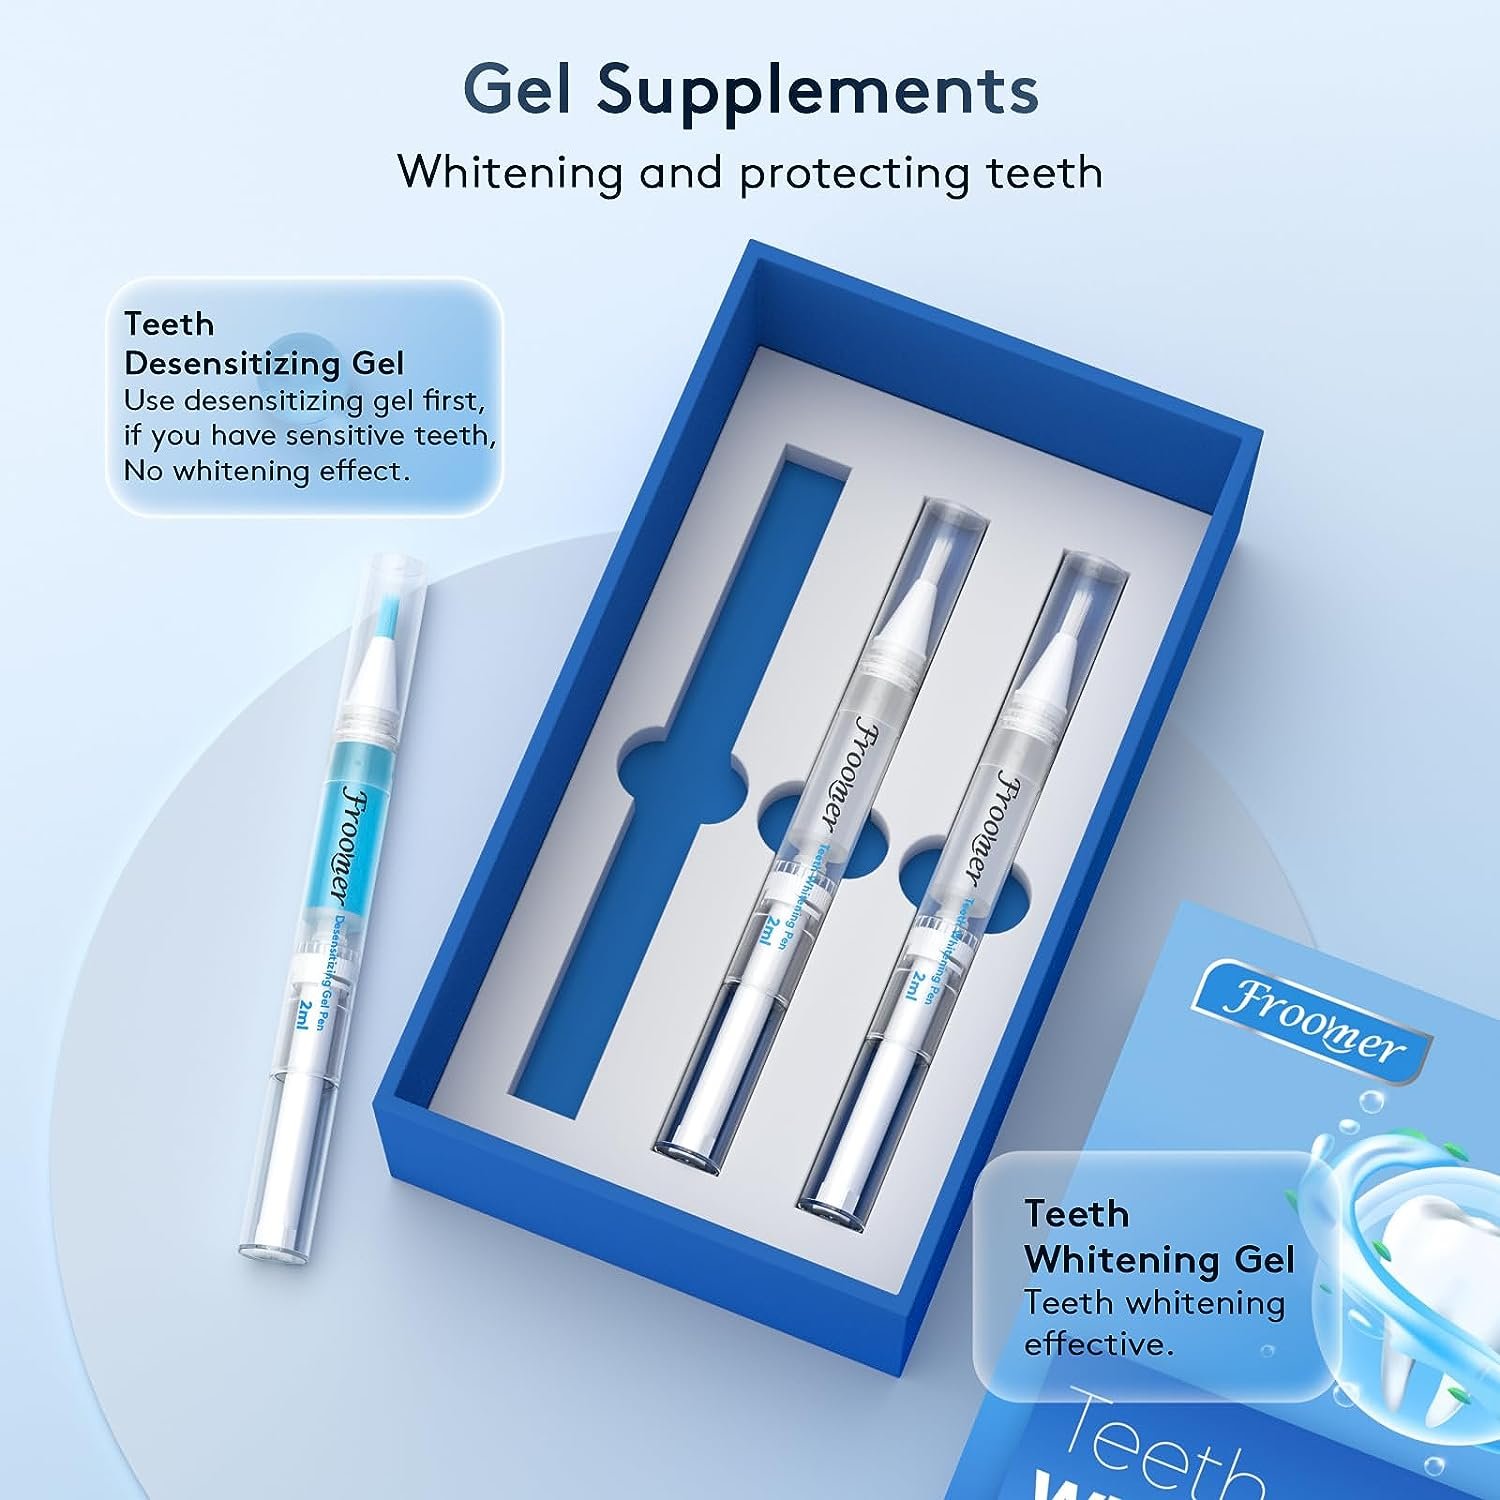 Teeth Whitening Kit with LED Lights, Teeth Whitener with 32X Powerful Blue-Red Rechargeable LED Light, 2+1 Teeth Whitening Gel- Effective for Sensitive Teeth, Accelerated Teeth Whitening